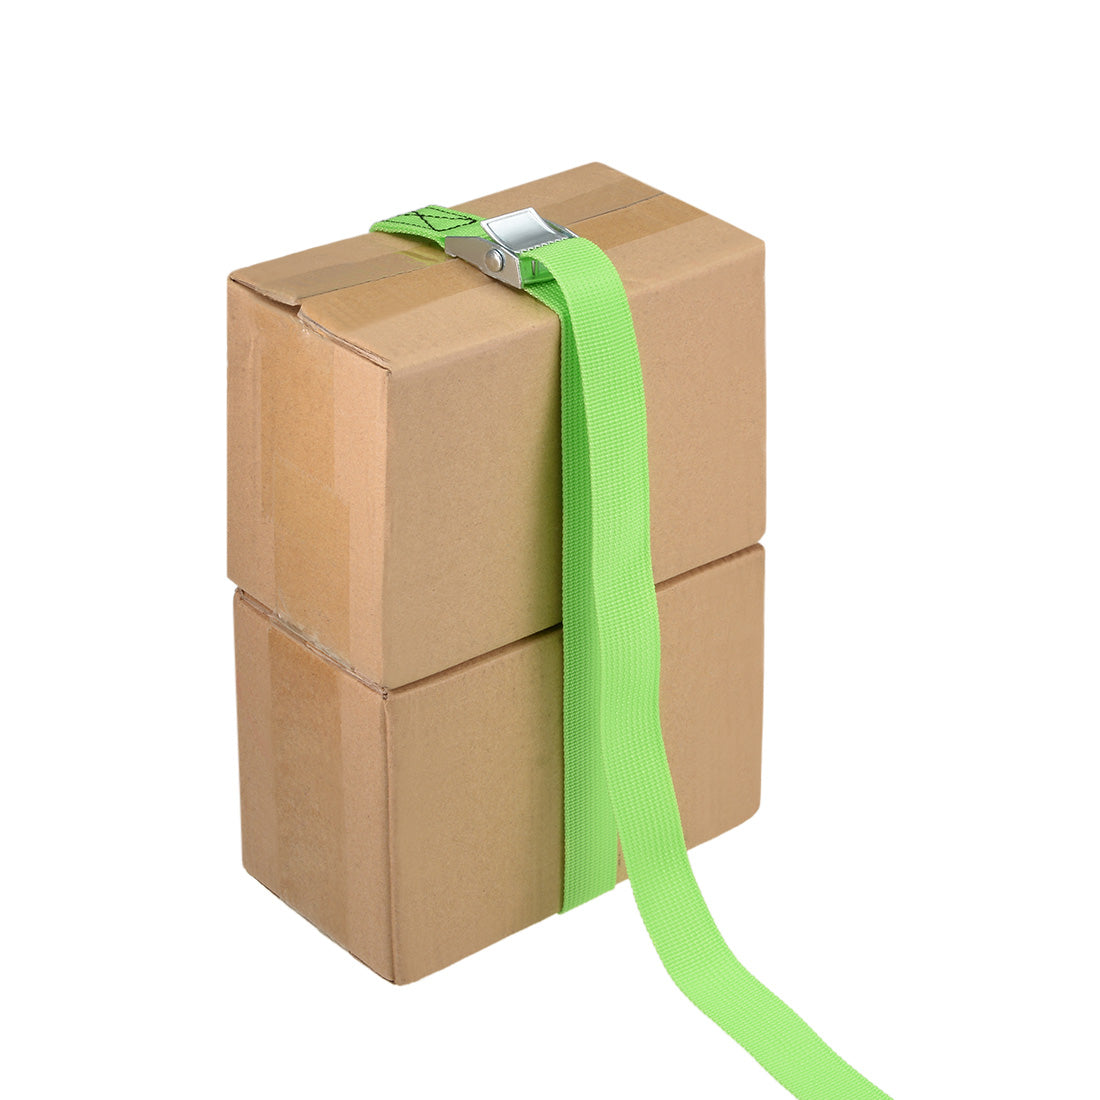 uxcell Uxcell Lashing Strap 1" x 10' Cargo Tie Down Straps with Cam Lock Buckle Up to 551lbs Green 4pcs